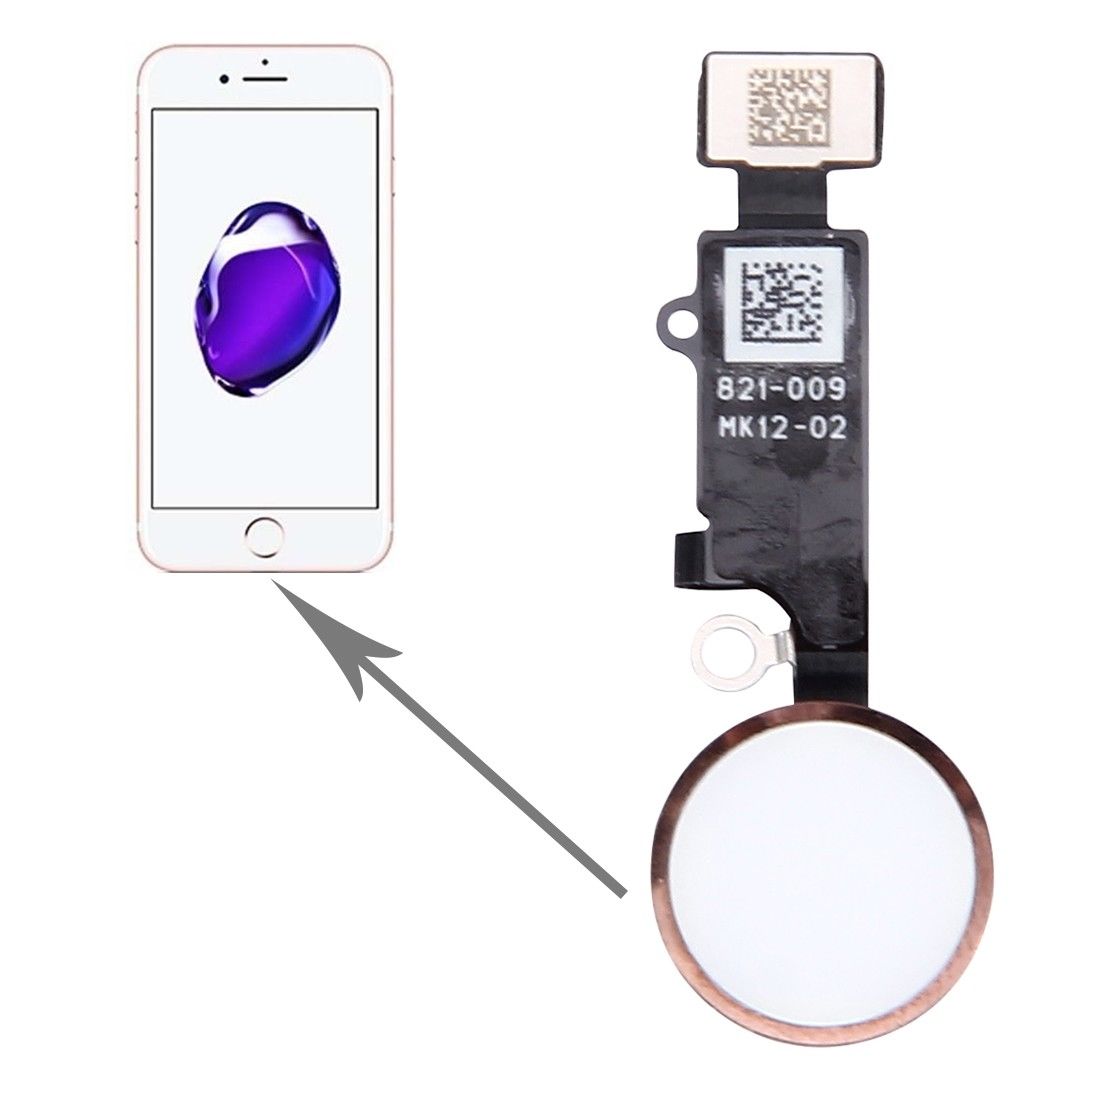 Apple iPhone 7 / 7 Plus Home Button Flex Cable - Rose for [product_price] - First Help Tech